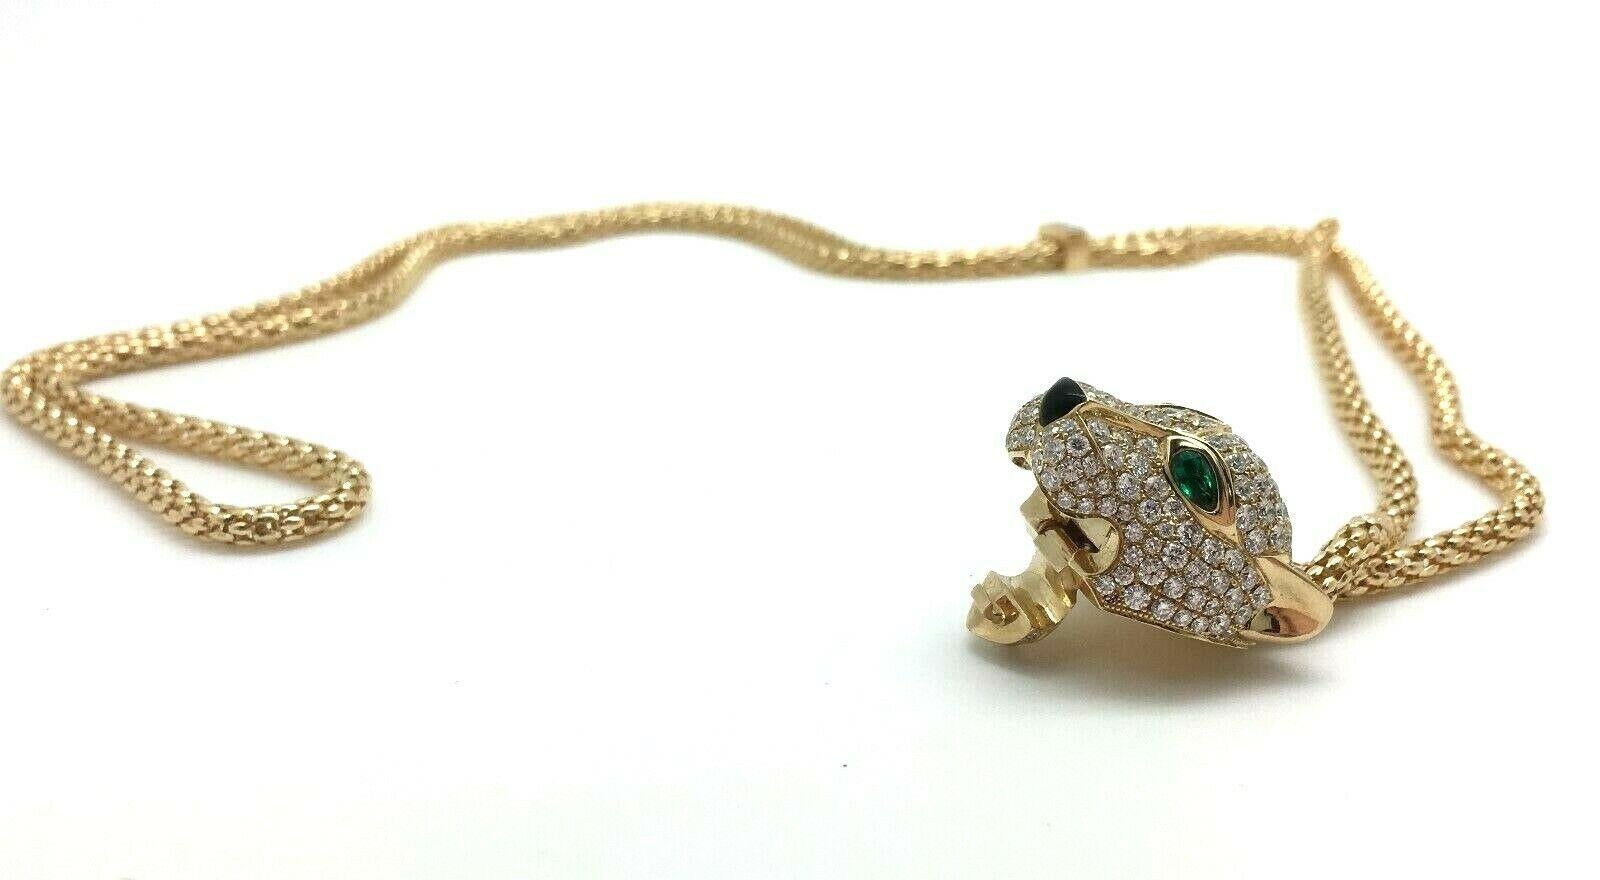 18K Yellow Gold 5.40 CTW Diamond & Emerald Adjustable Panther Necklace 40 Grams

The Necklace Contains Numerous Round Brilliant Cut Natural Diamonds, Weighing Approximately 5.40 Carat Total Weight.
Color Grade: F-G
Clarity Grade: VVS-VS1

There Are